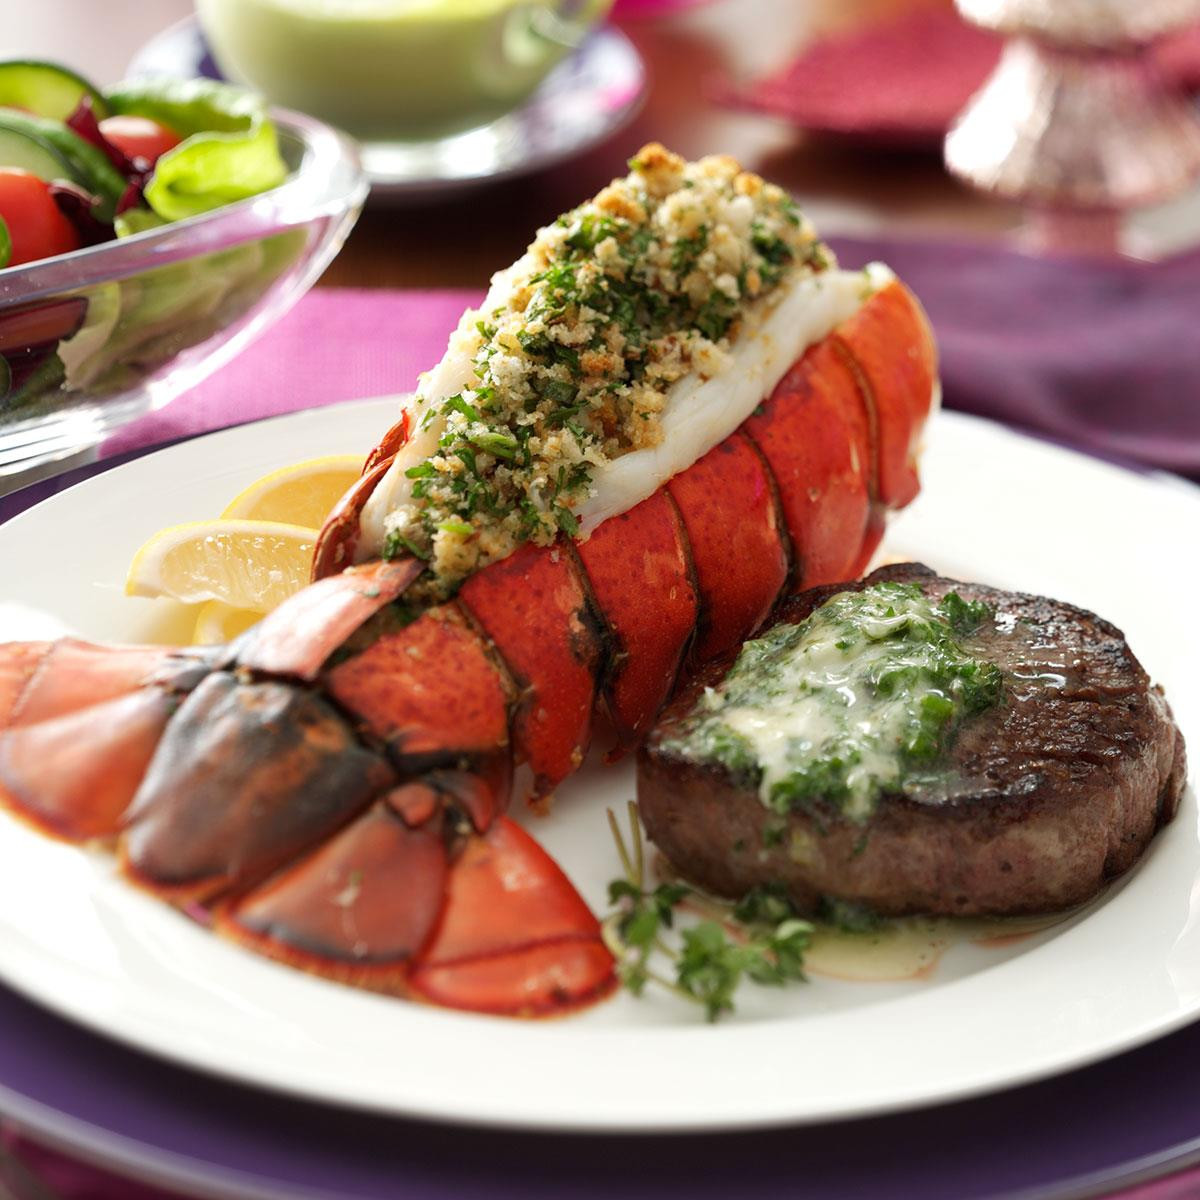 Surf And Turf Dinner Party Ideas
 Surf & Turf Recipe